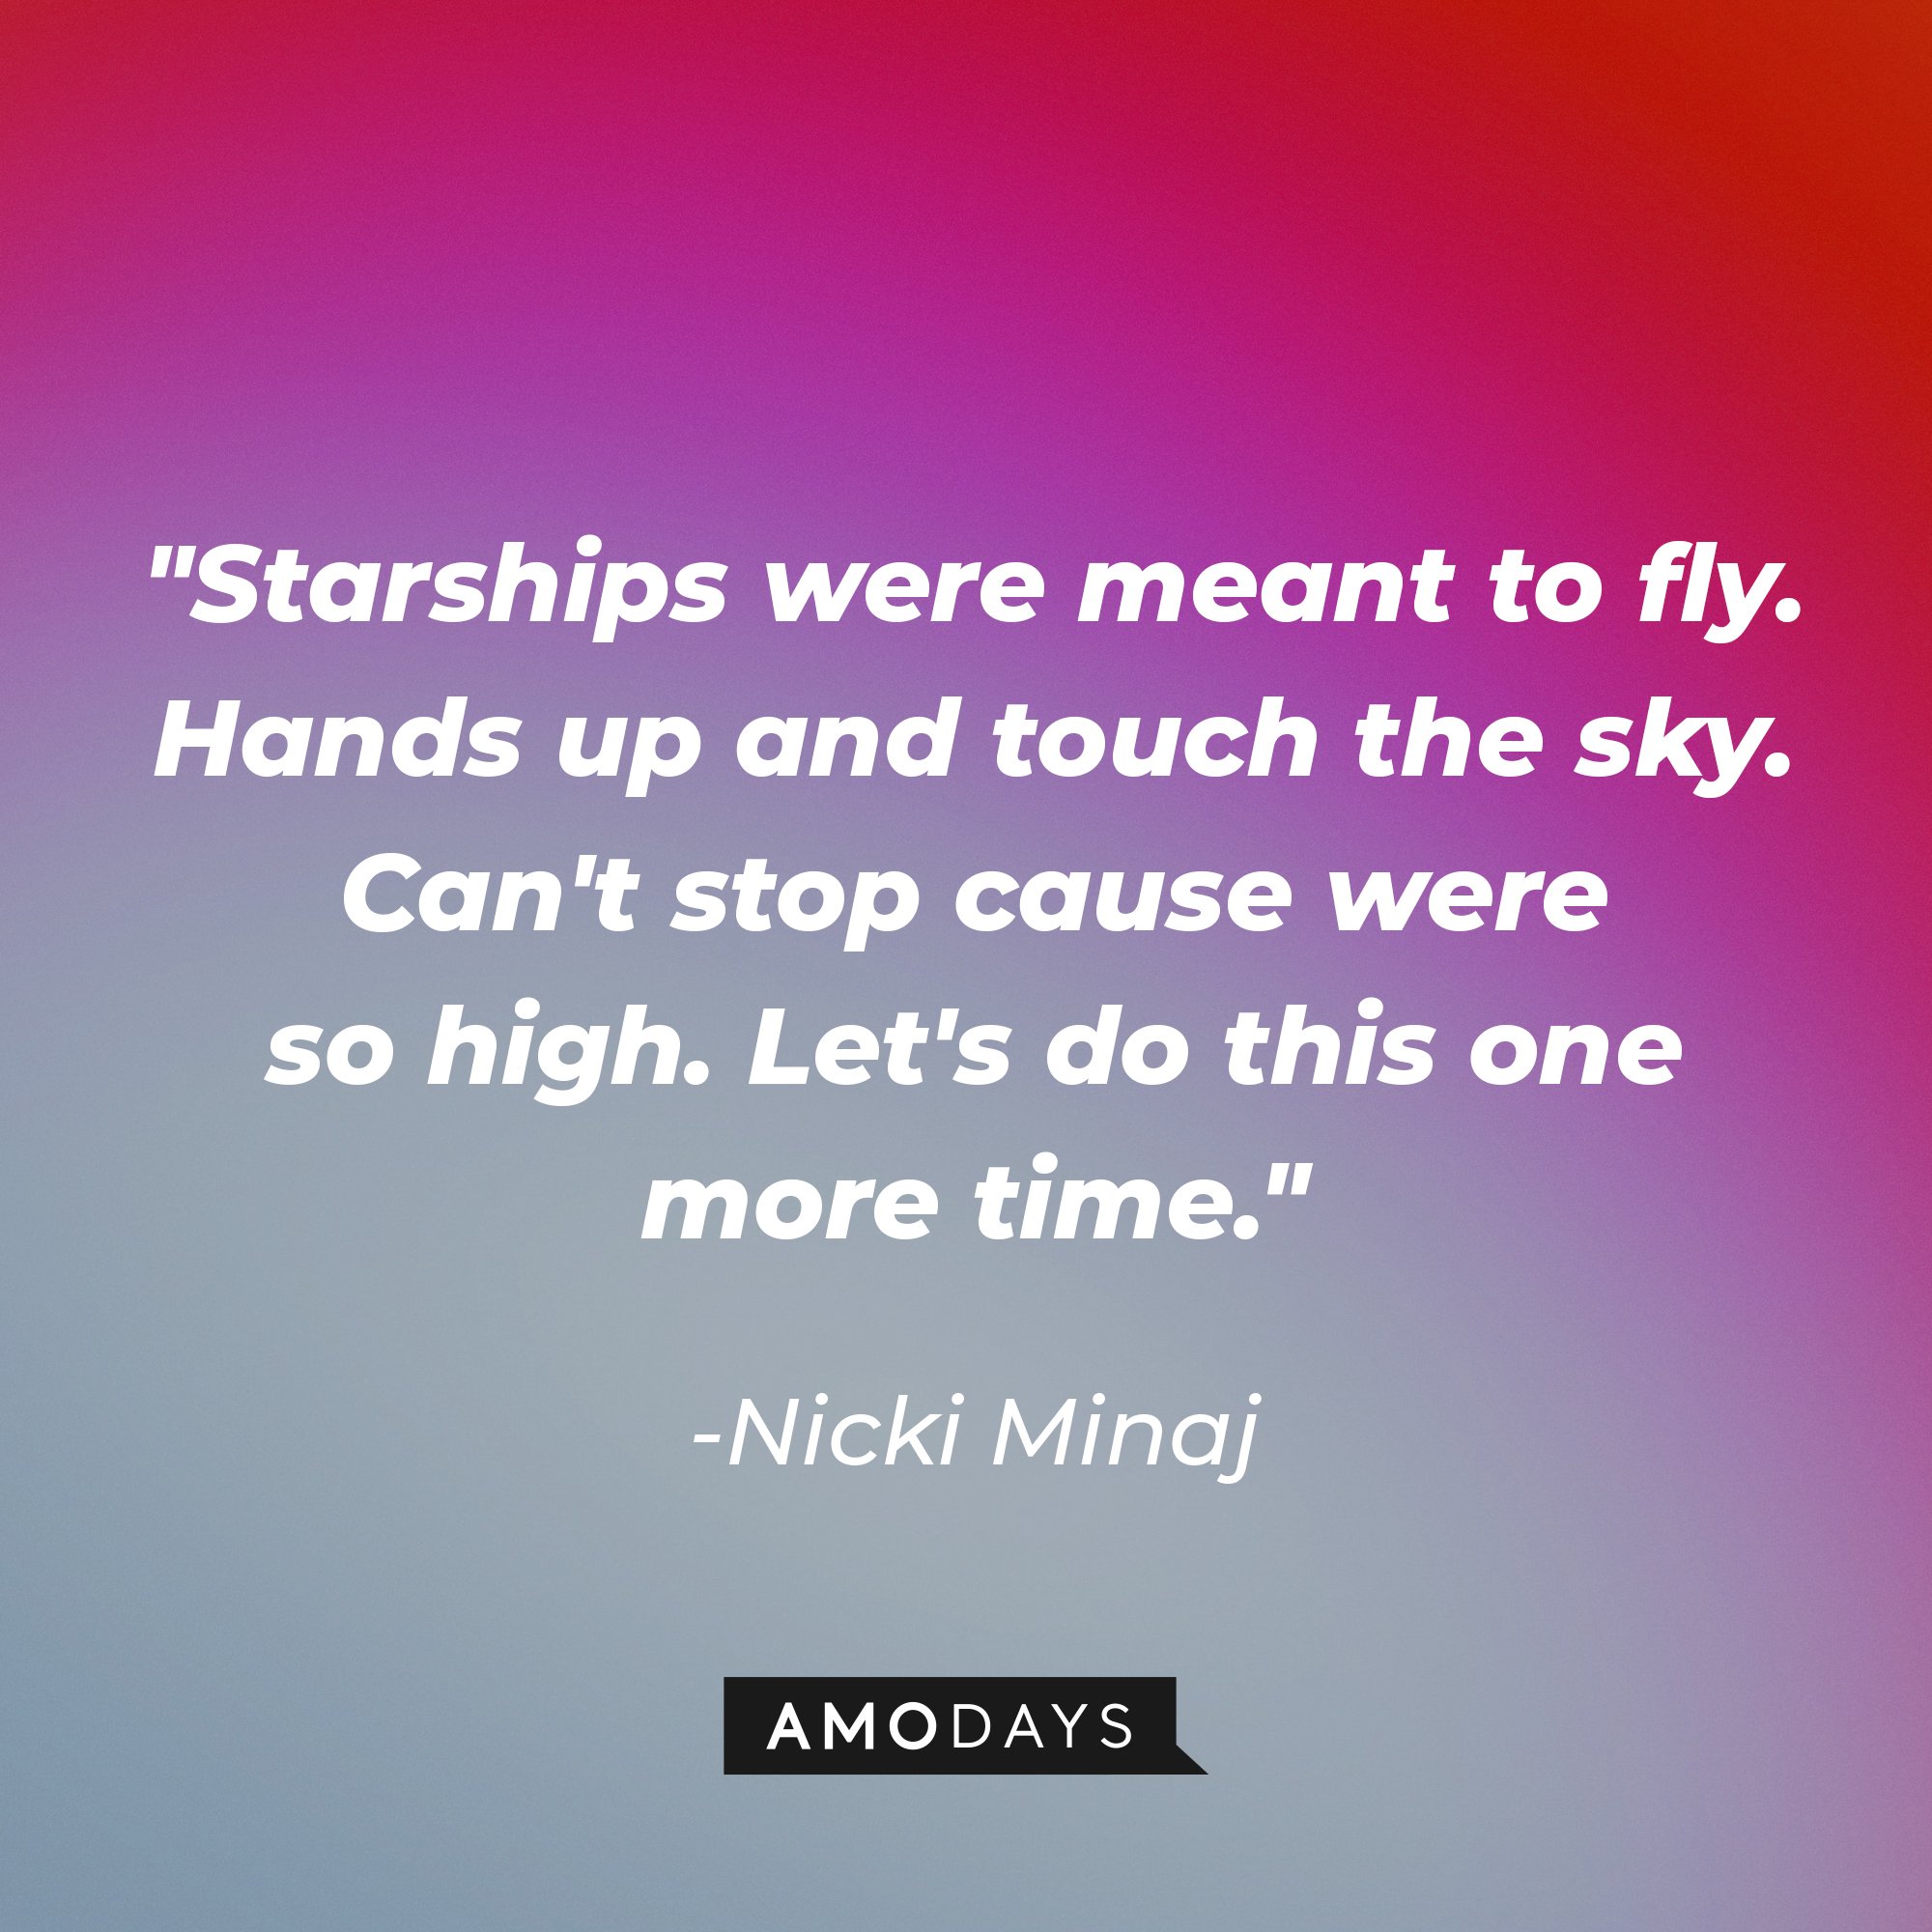  Nicki Minaj’s quote: "Starships were meant to fly. Hands up and touch the sky. Can't stop cause were so high. Let's do this one more time."  | Image: AmoDays